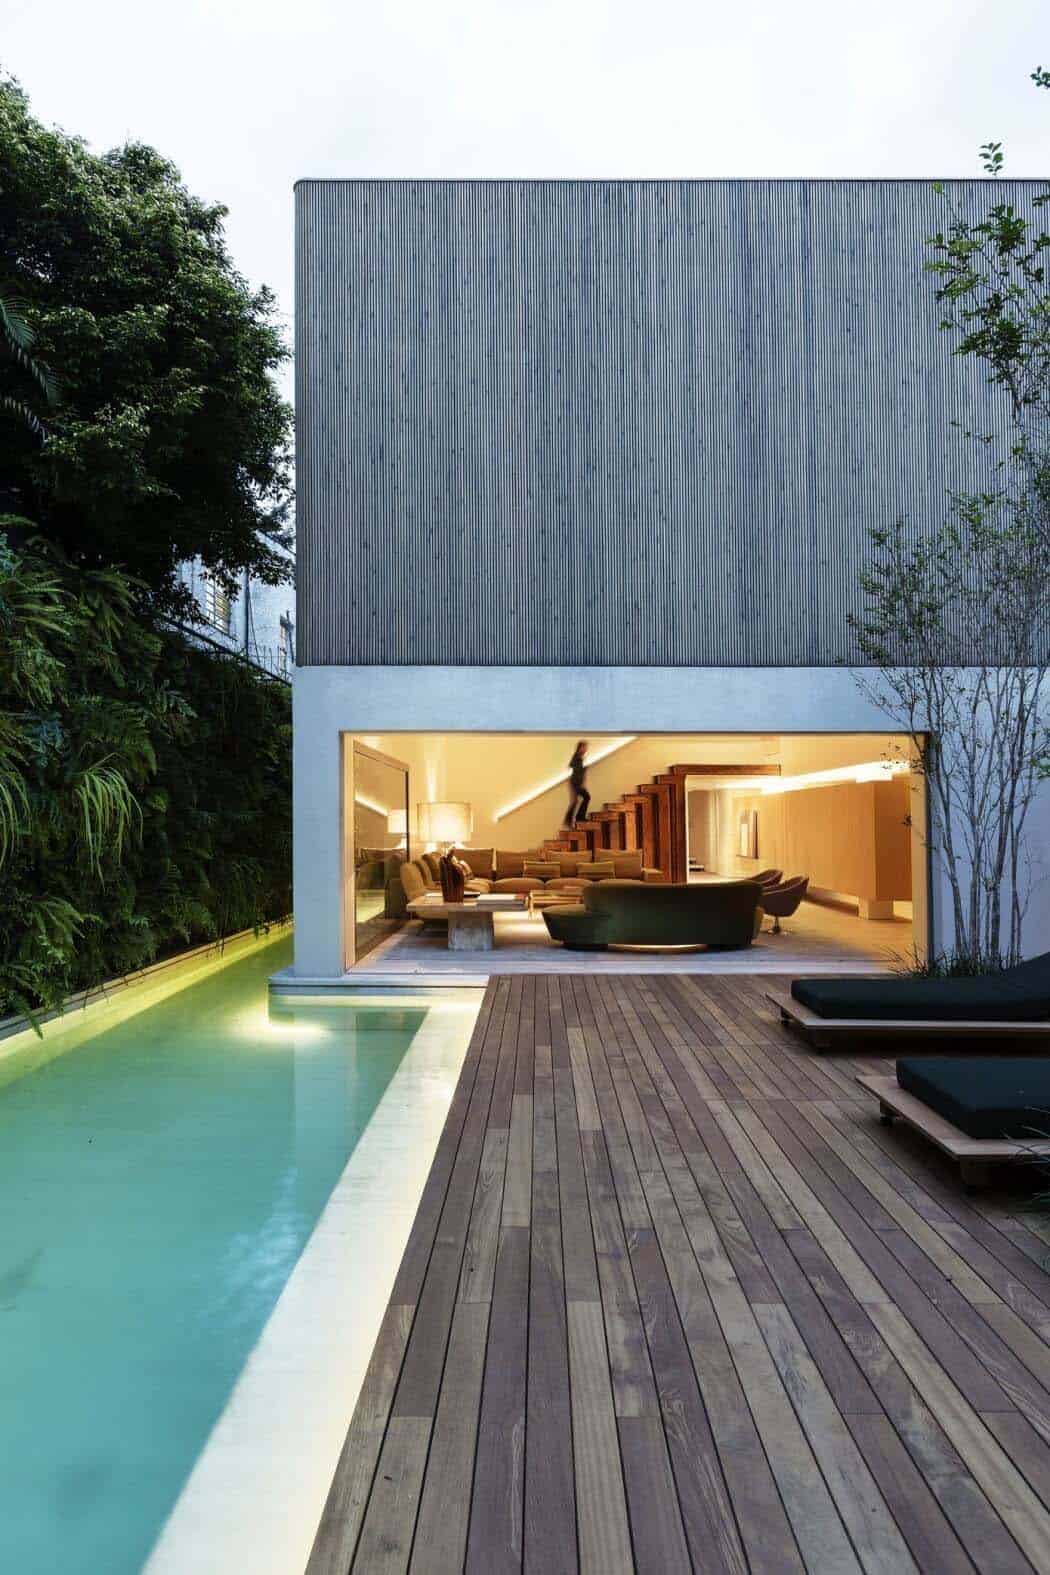 Modern Brazilian home embraces transparency and nature